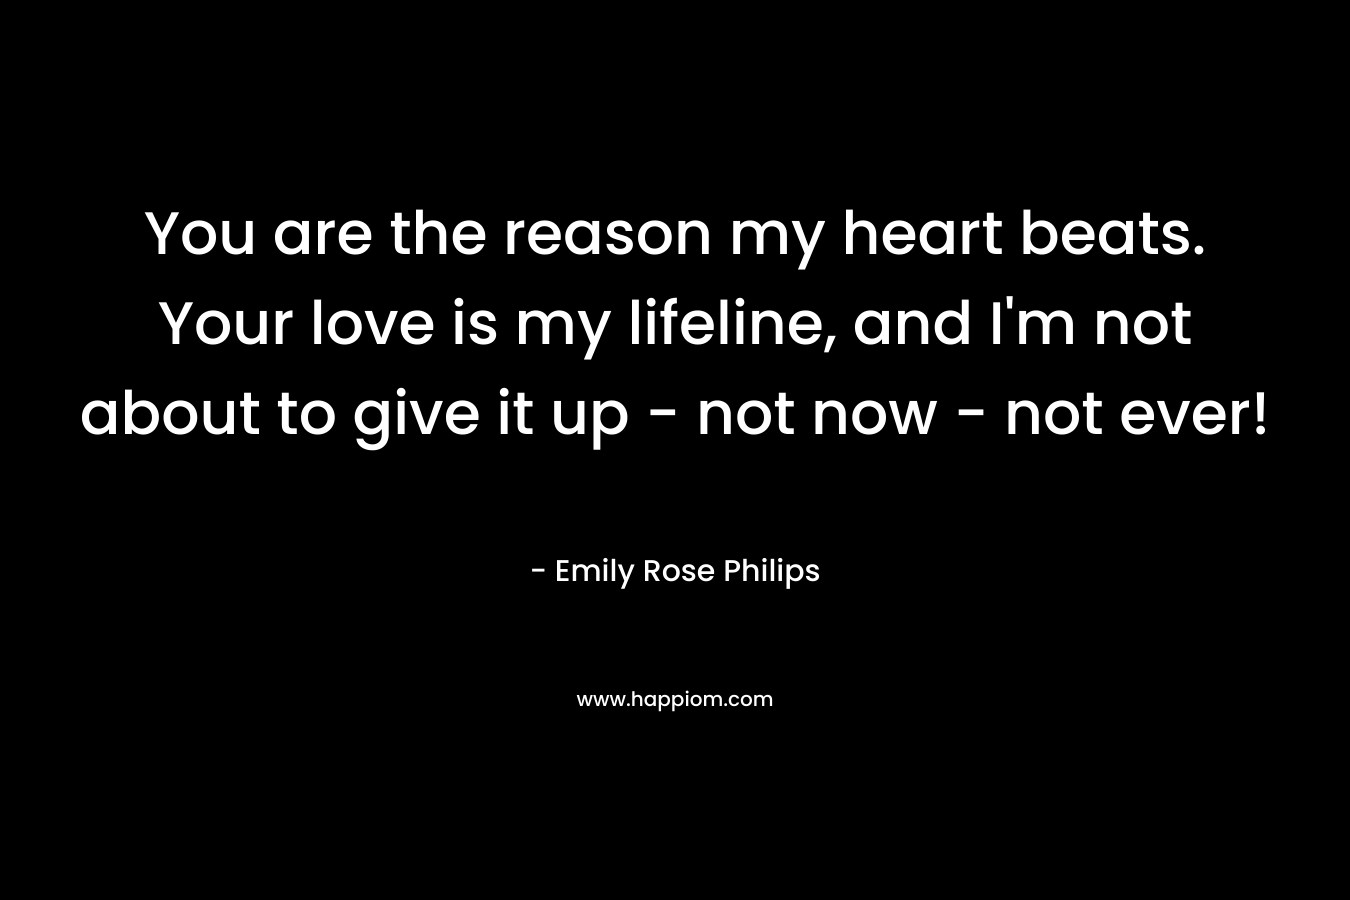 You are the reason my heart beats. Your love is my lifeline, and I'm not about to give it up - not now - not ever!